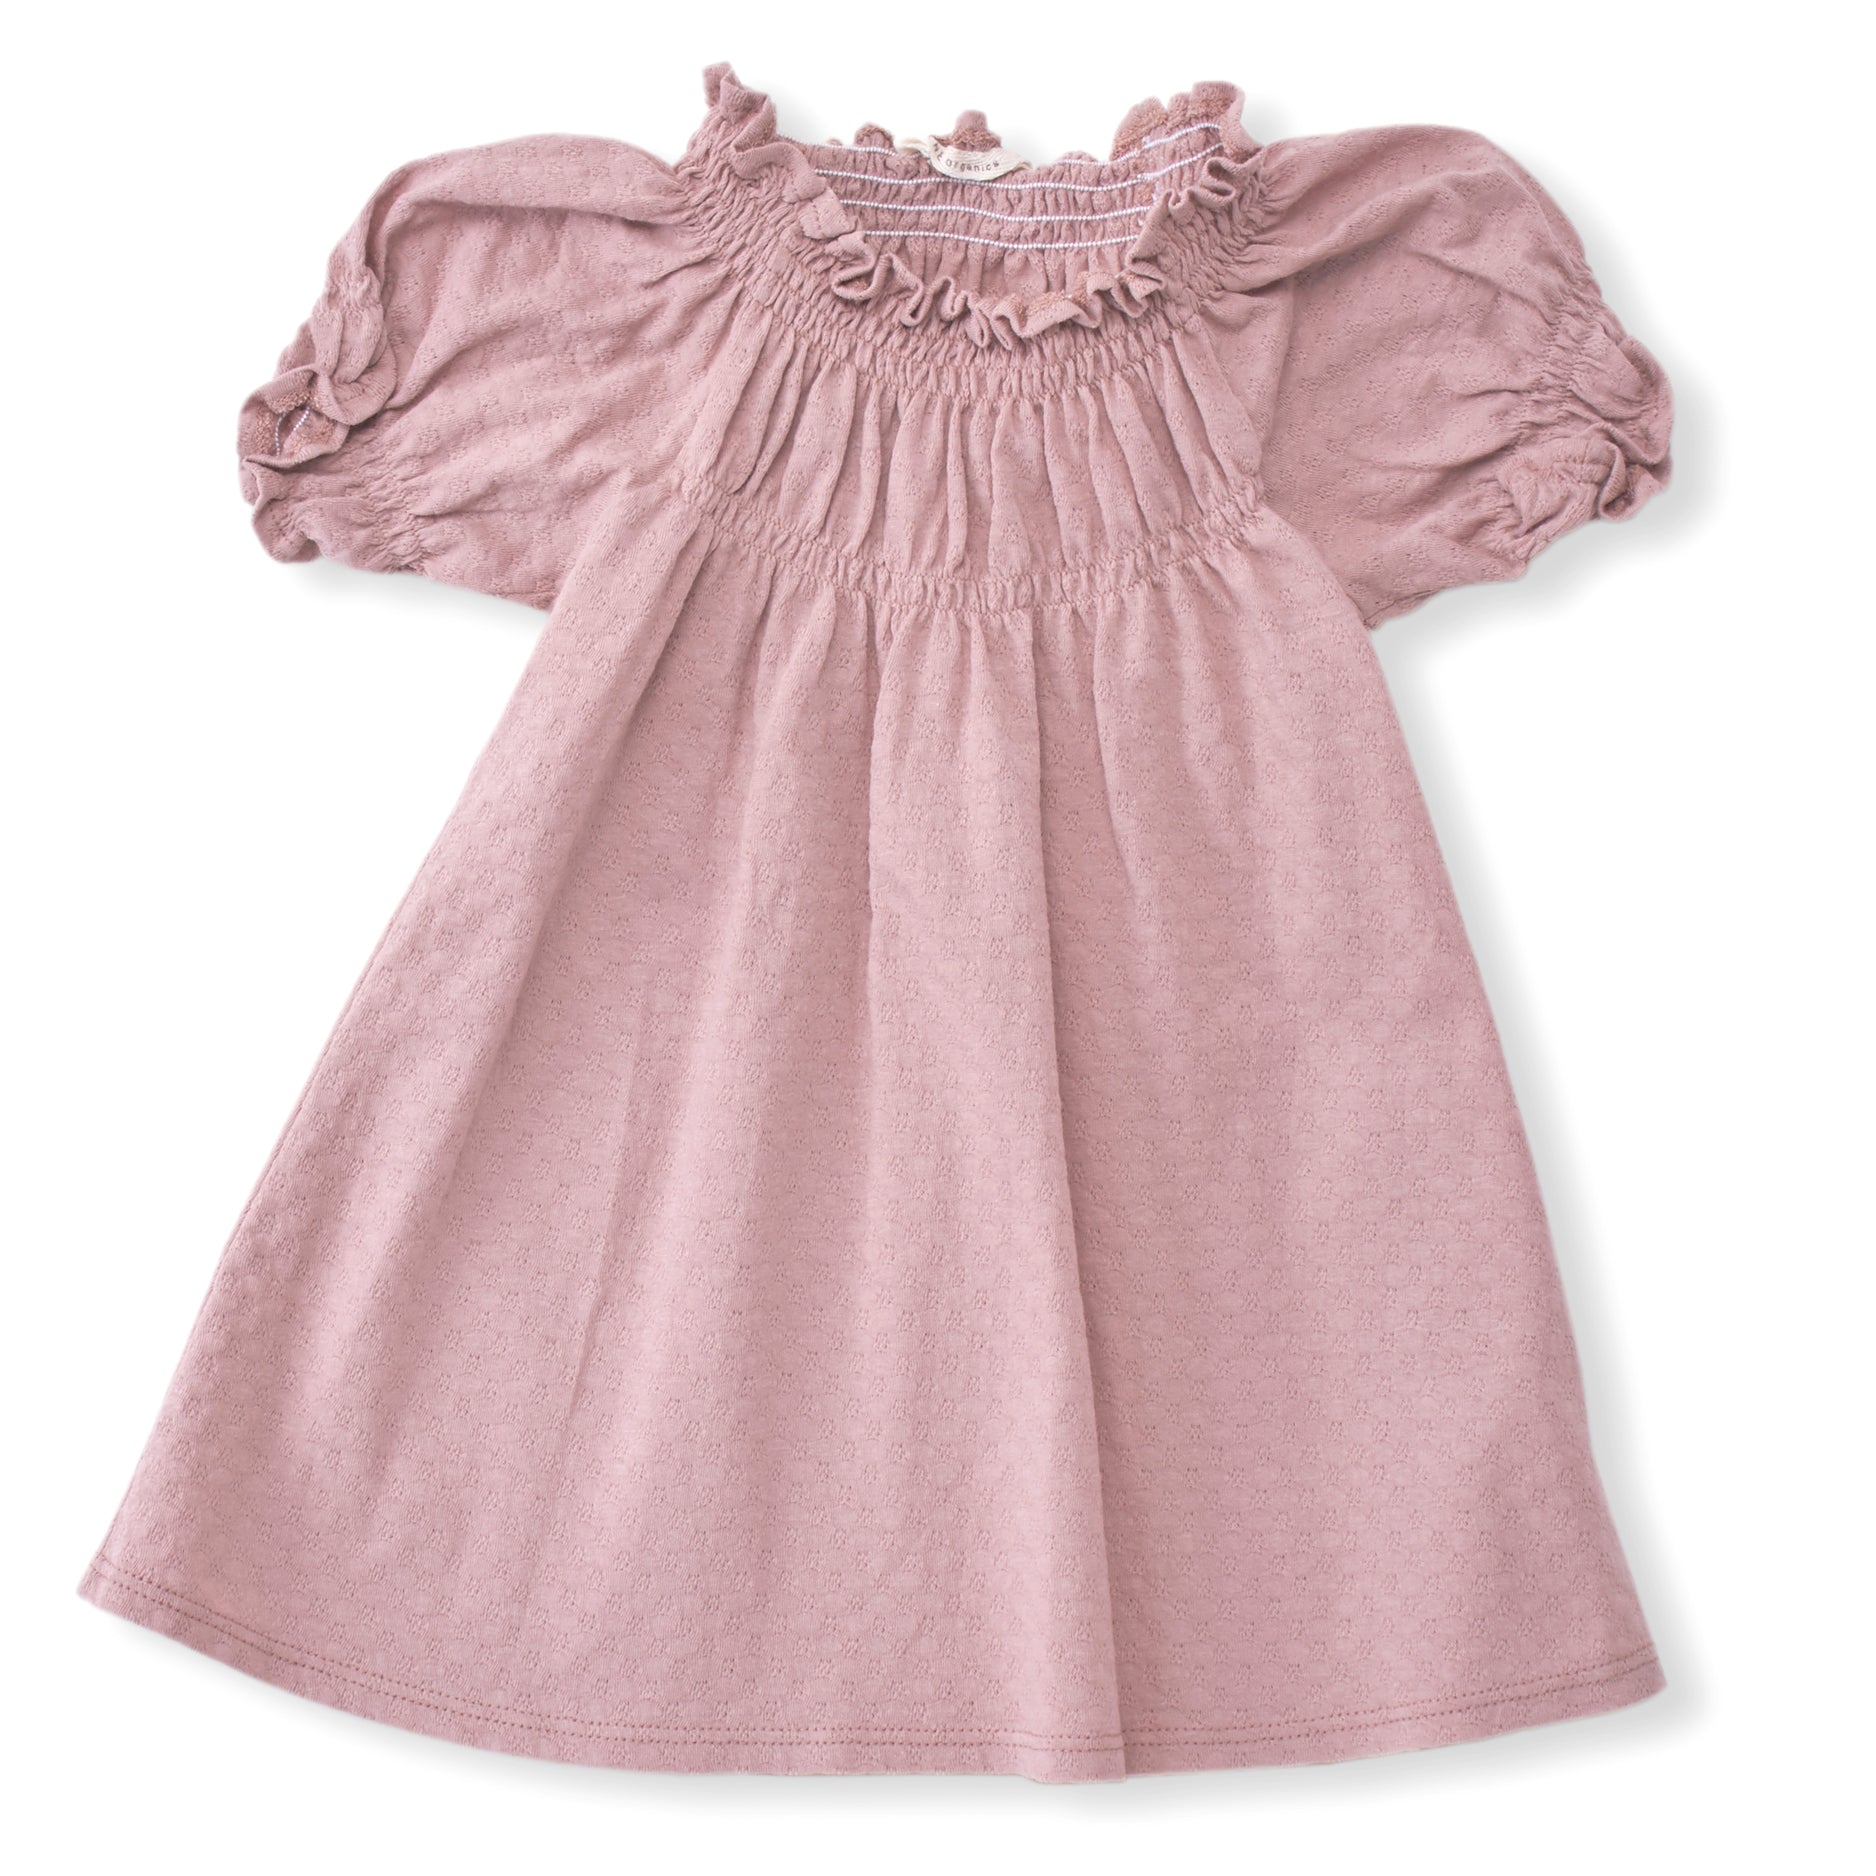 rose color pointelle short sleeved dress with soft elastic gathering at neckline and cuffs. 100% organic cotton pointelle knit.